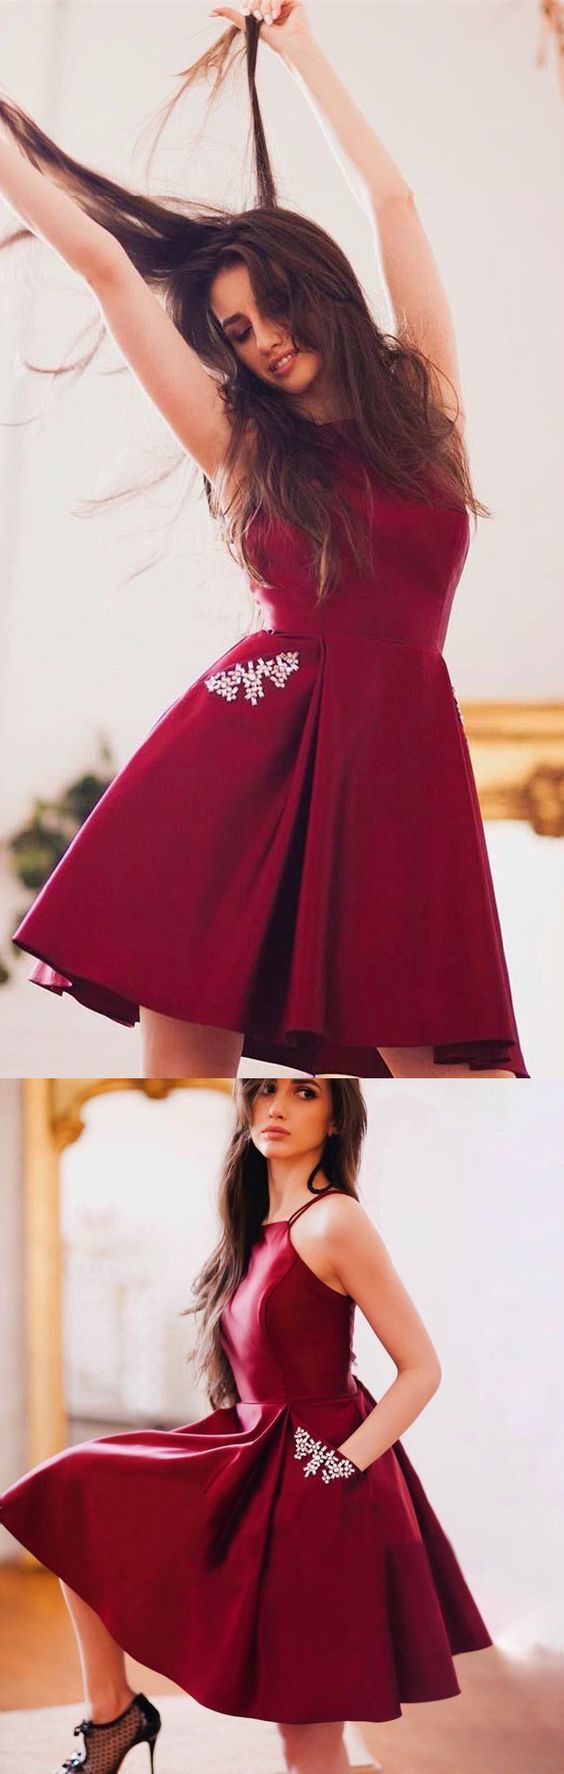 Burgundy With Aylin Homecoming Dresses Pockets A-Line Short Cute Party Dress CD785